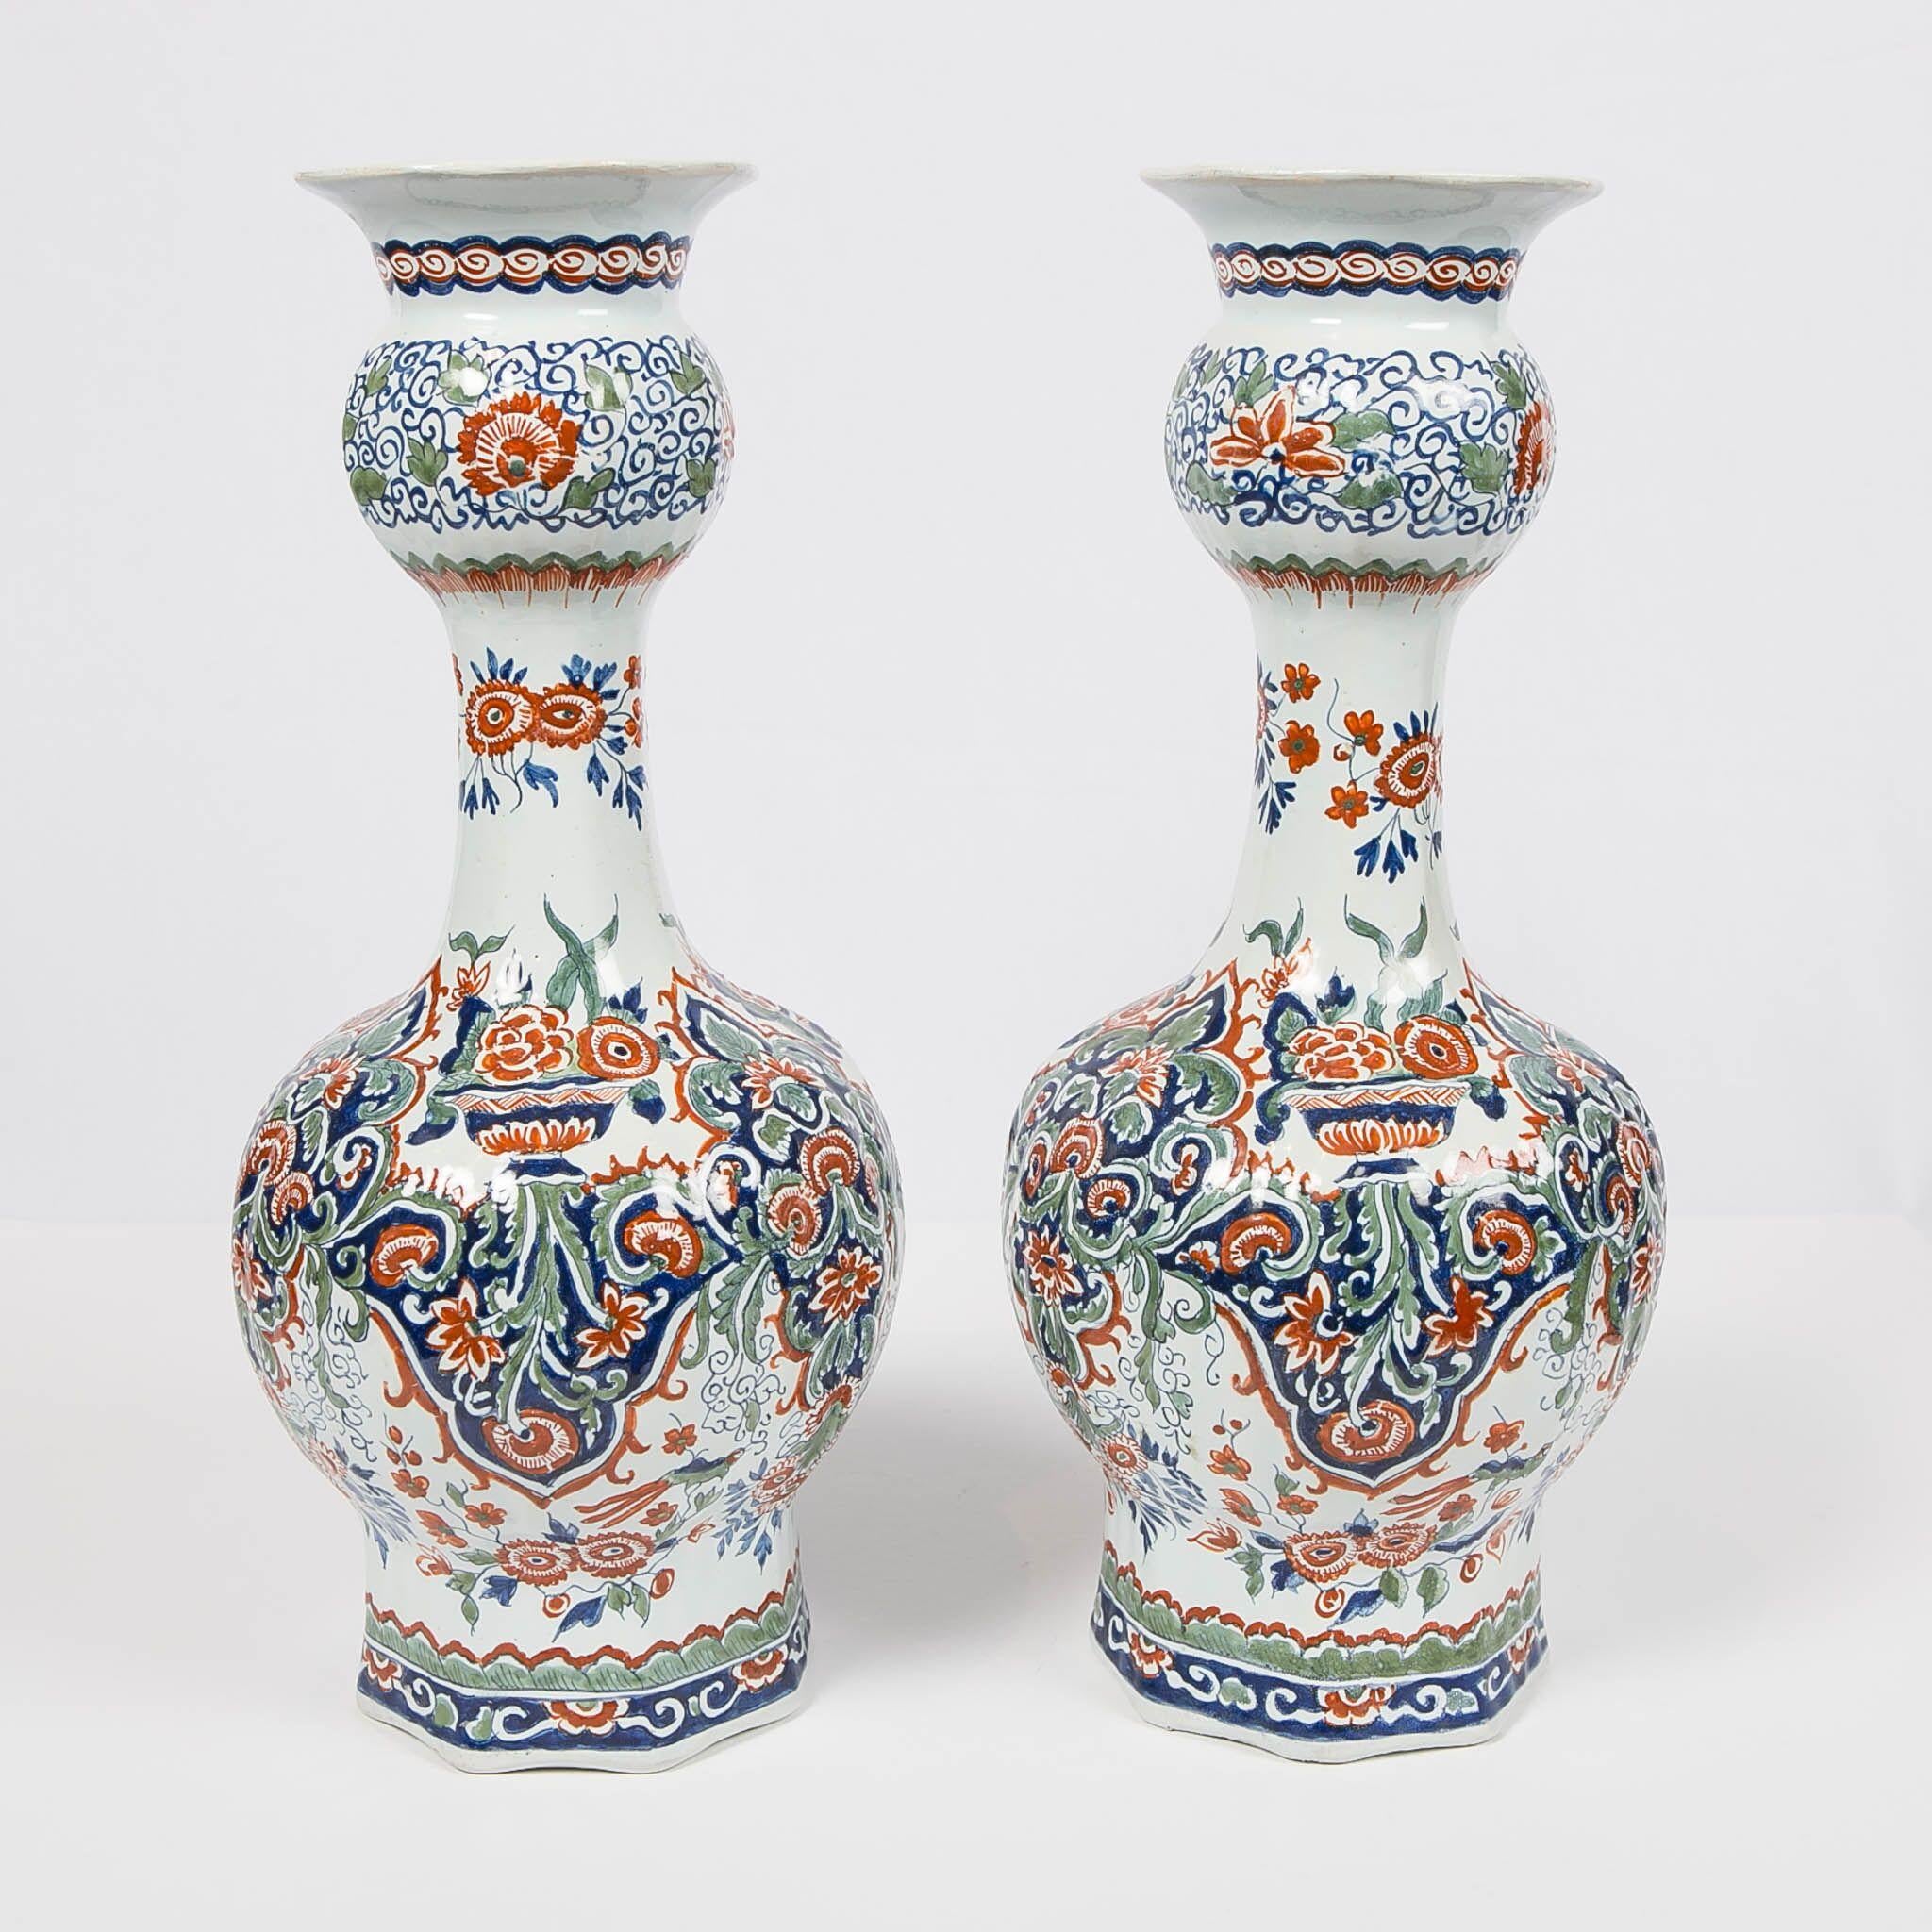 We are pleased to offer this pair of Dutch delft vases painted in the Cashmere palette.
Made circa 1870 the vases are a nice size, 14.5